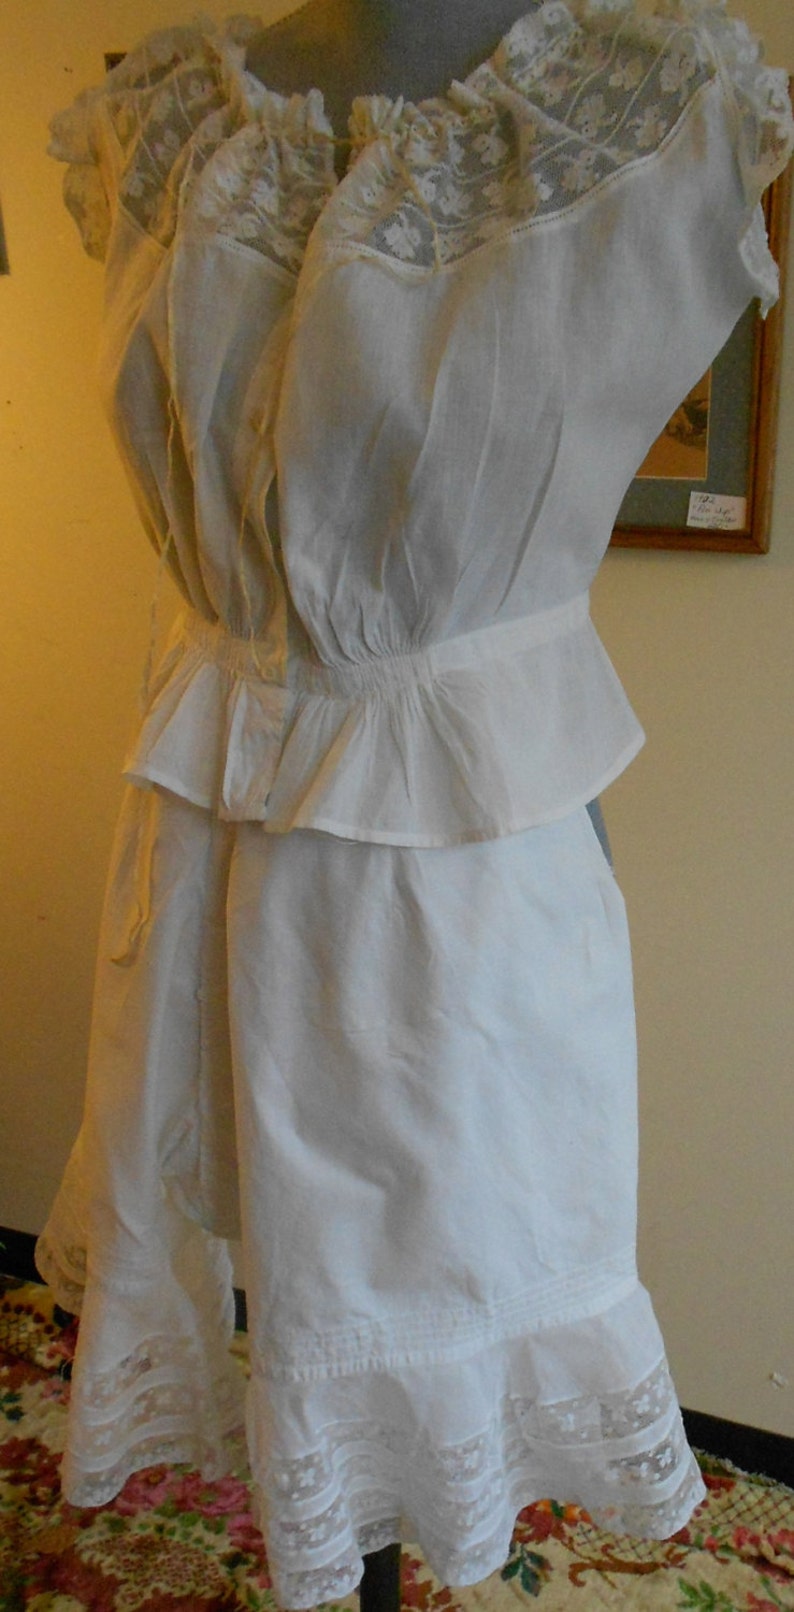 1890's-1900, one size drawer string bloomers, of white lawn cotton image 3